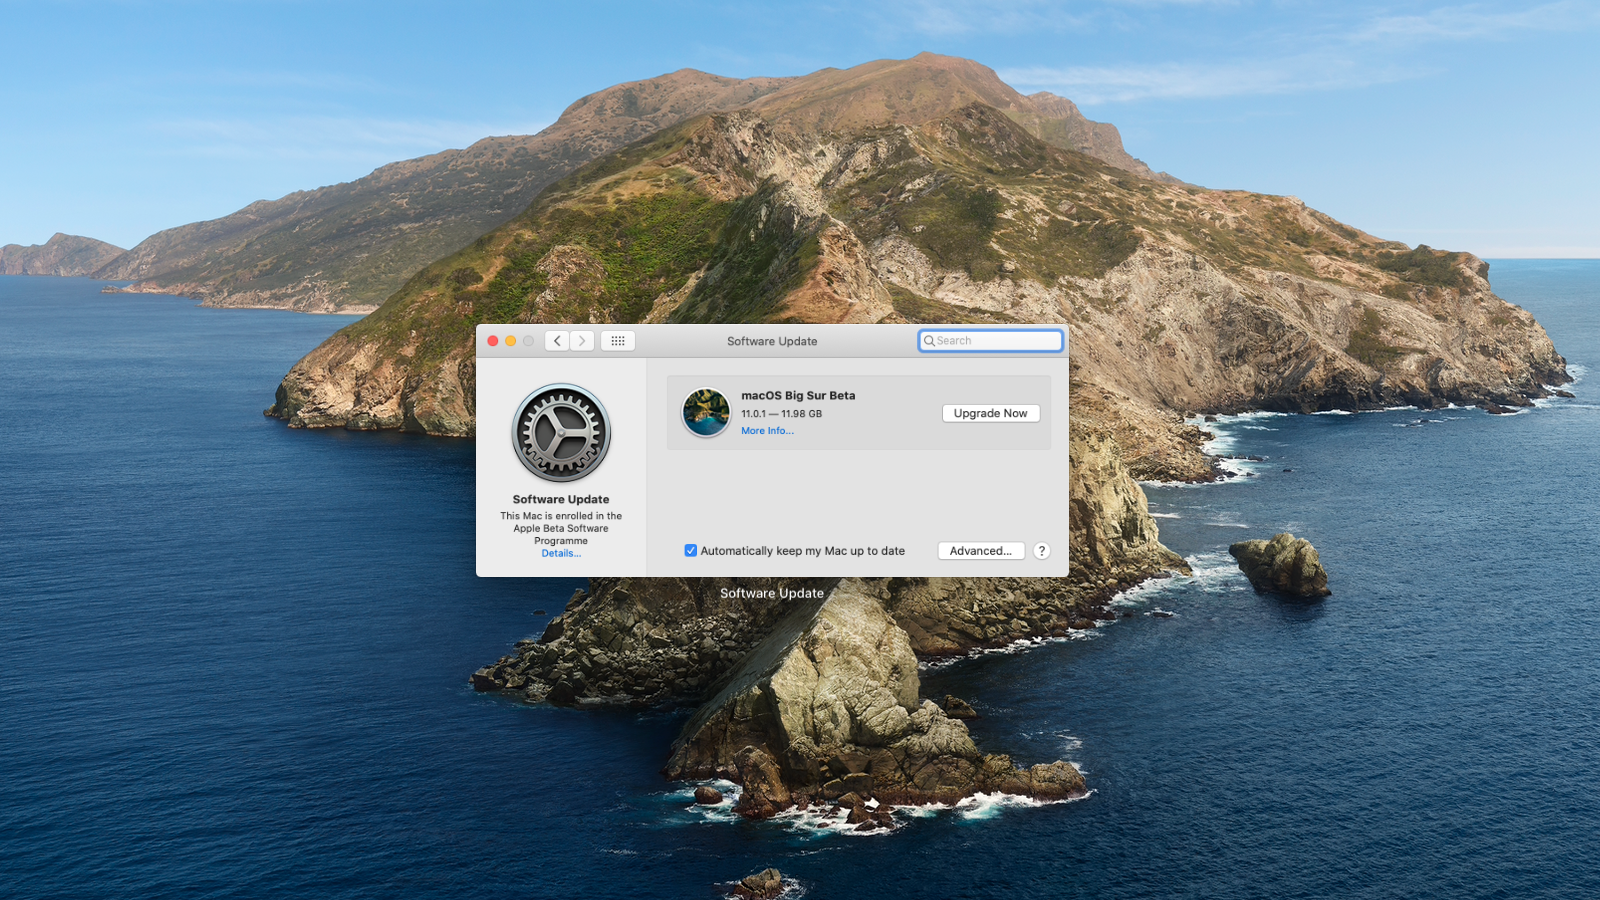 How to update macOS: Update to Big Sur from Catalina